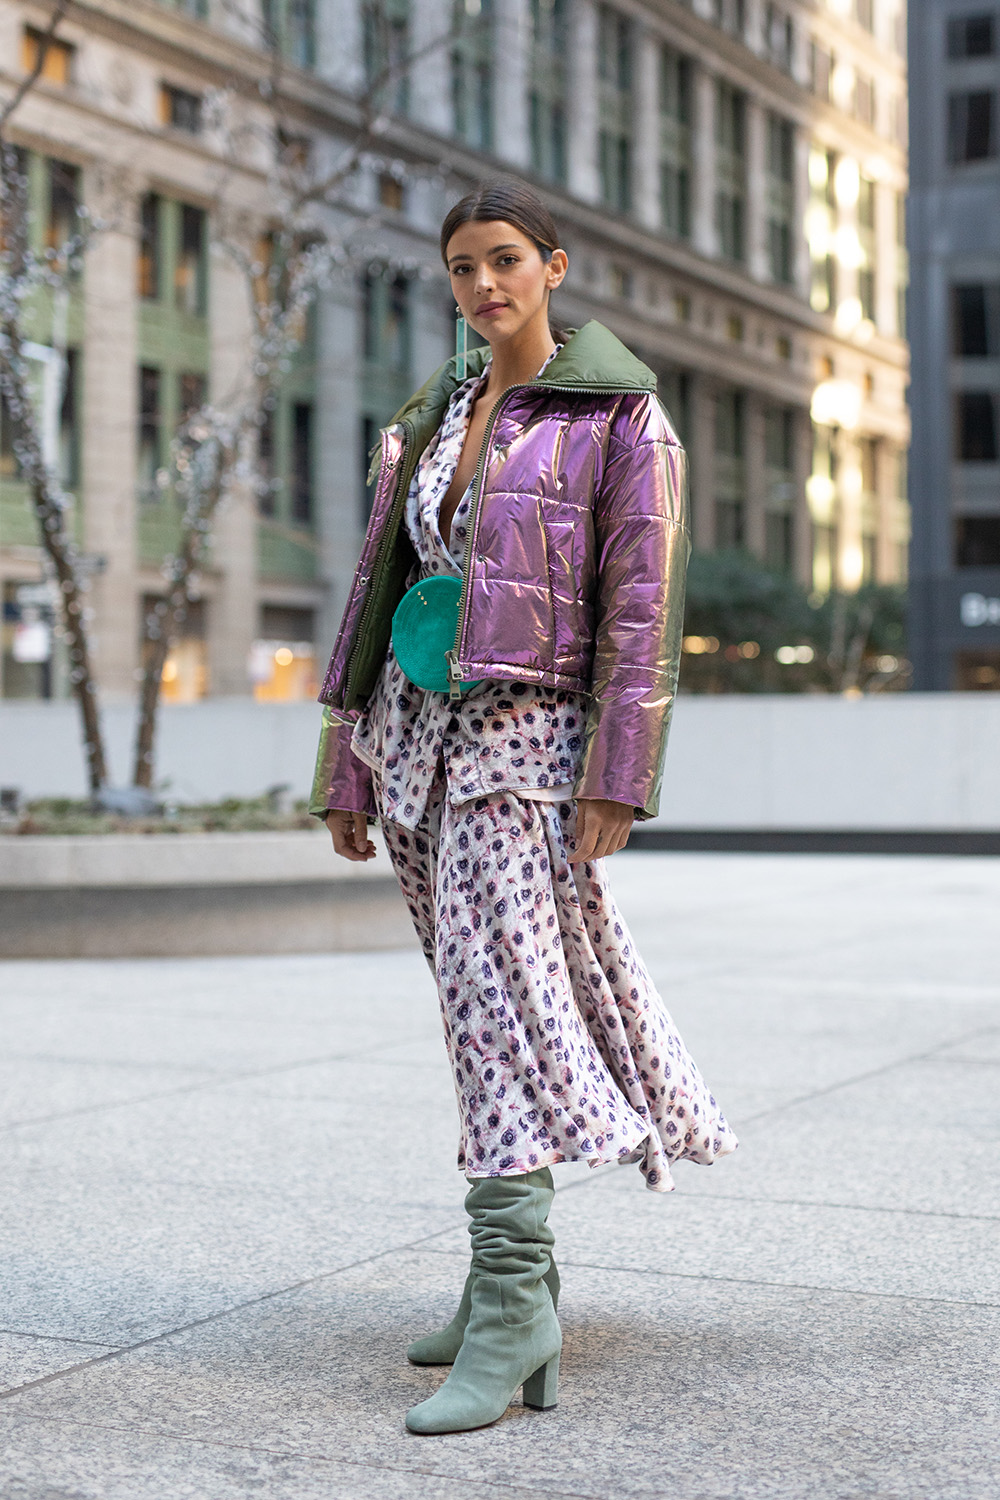 NEW YORK, NEW YORK - FEBRUARY 09: Olivia Perez is seen on the street during New York Fashion Week AW19 wearing Longchamp with leopard print dress on February 09, 2019 in New York City. (Photo by Matthew Sperzel/Getty Images)